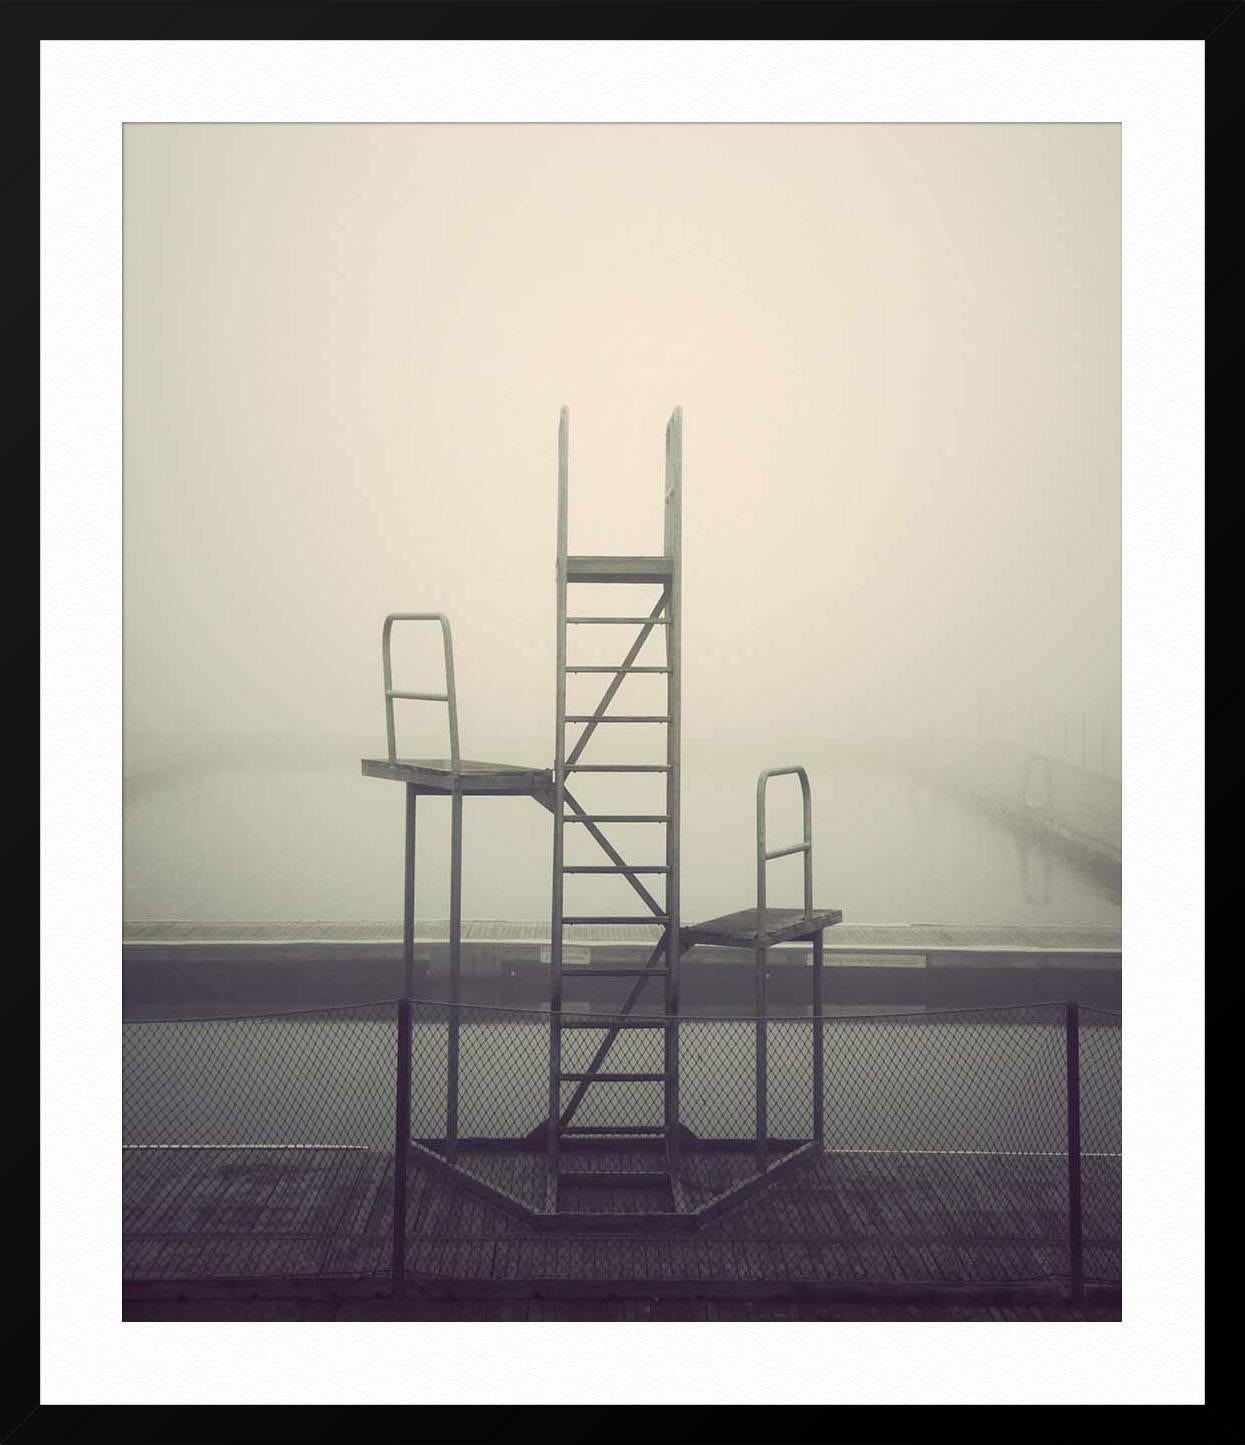 ABOUT THIS PIECE: This photograph was shot in the Copenhagen Harbour at the ''Copencabana'' on an early Sunday morning in epic fog. Photographer Kim Høltermand is known for his moody, quiet photos that show public spaces before the crowds. They